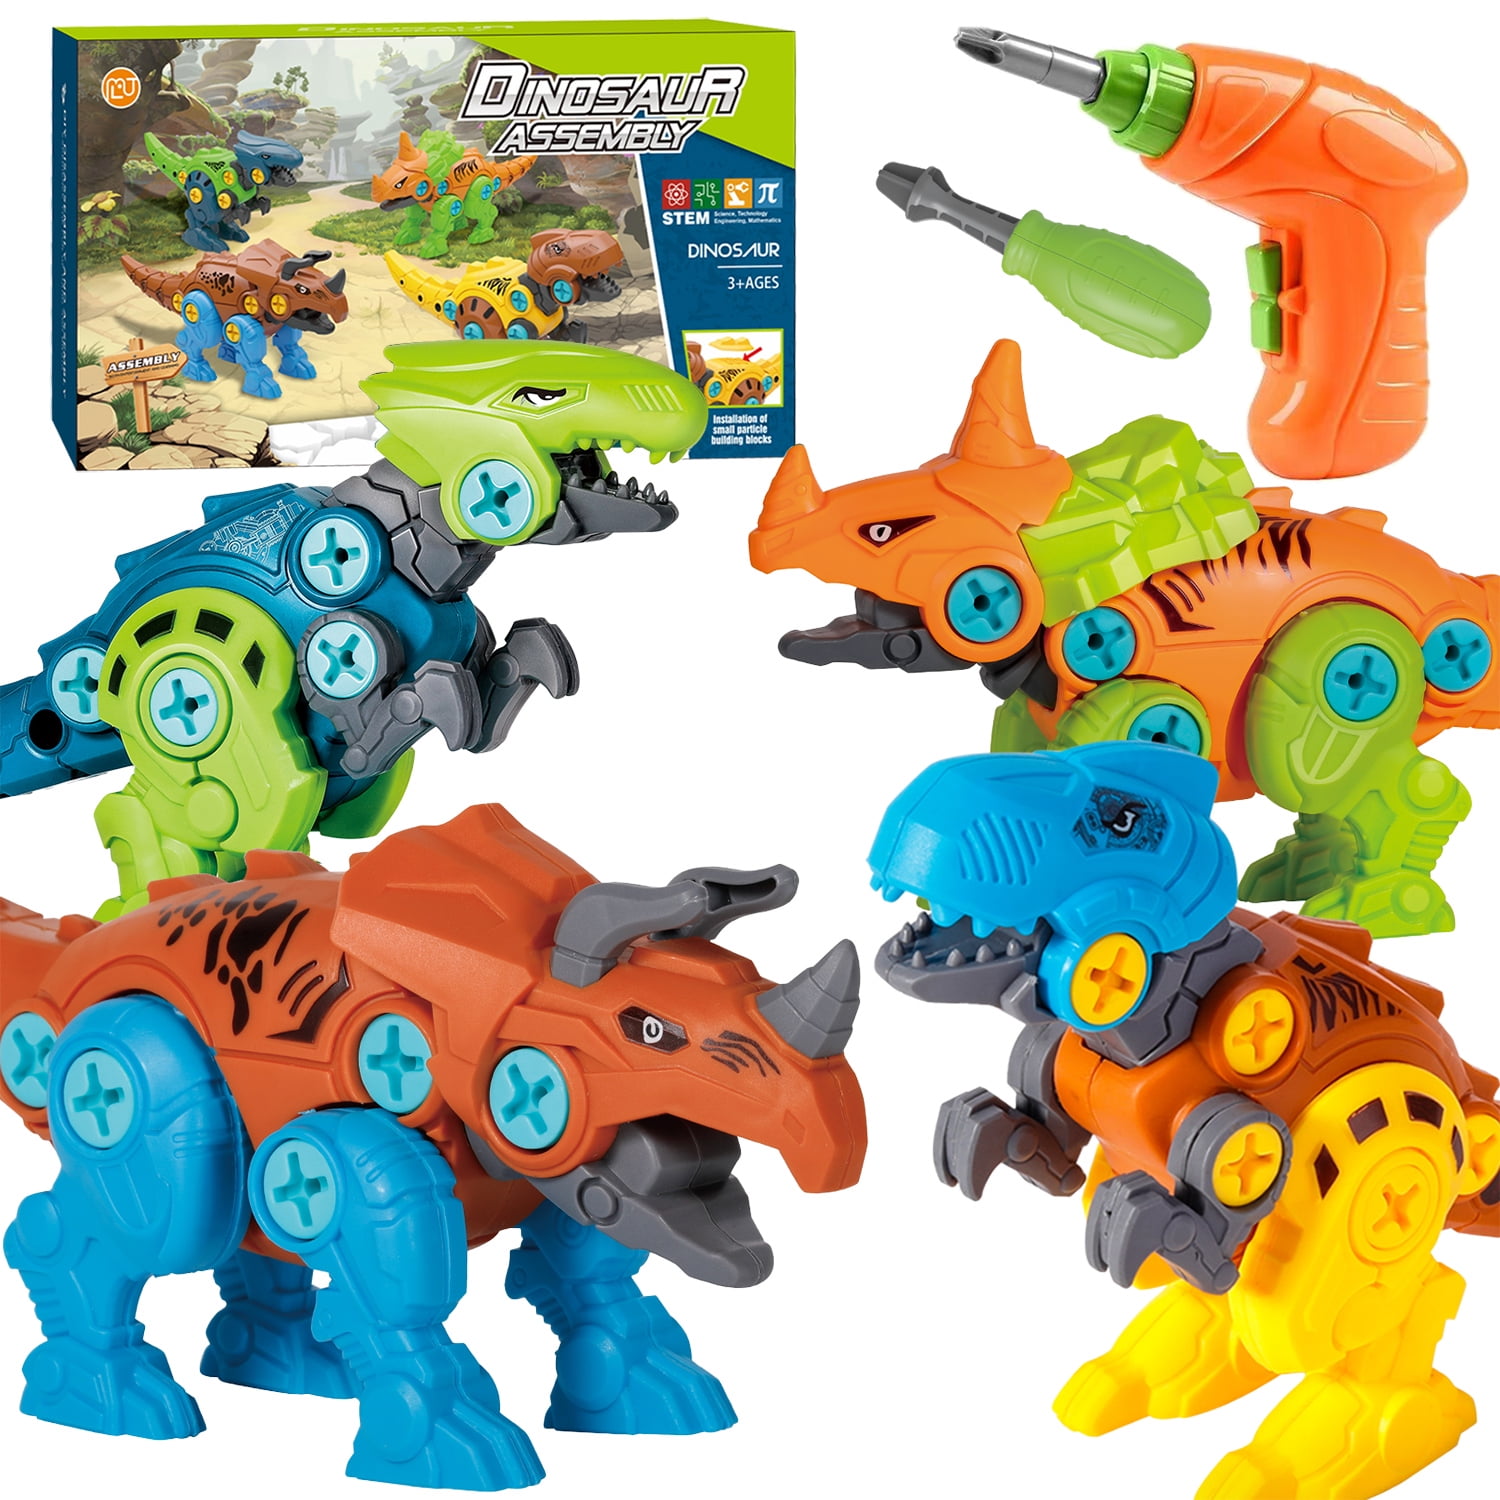 3 Pack STEM Construction Building Toy Set with Electric Drill Tools Take Apart Dinosaur Toys for Kids Educational Learning Games Play Kit Birthday Gifts for Boys Age 3 4 5 6 7